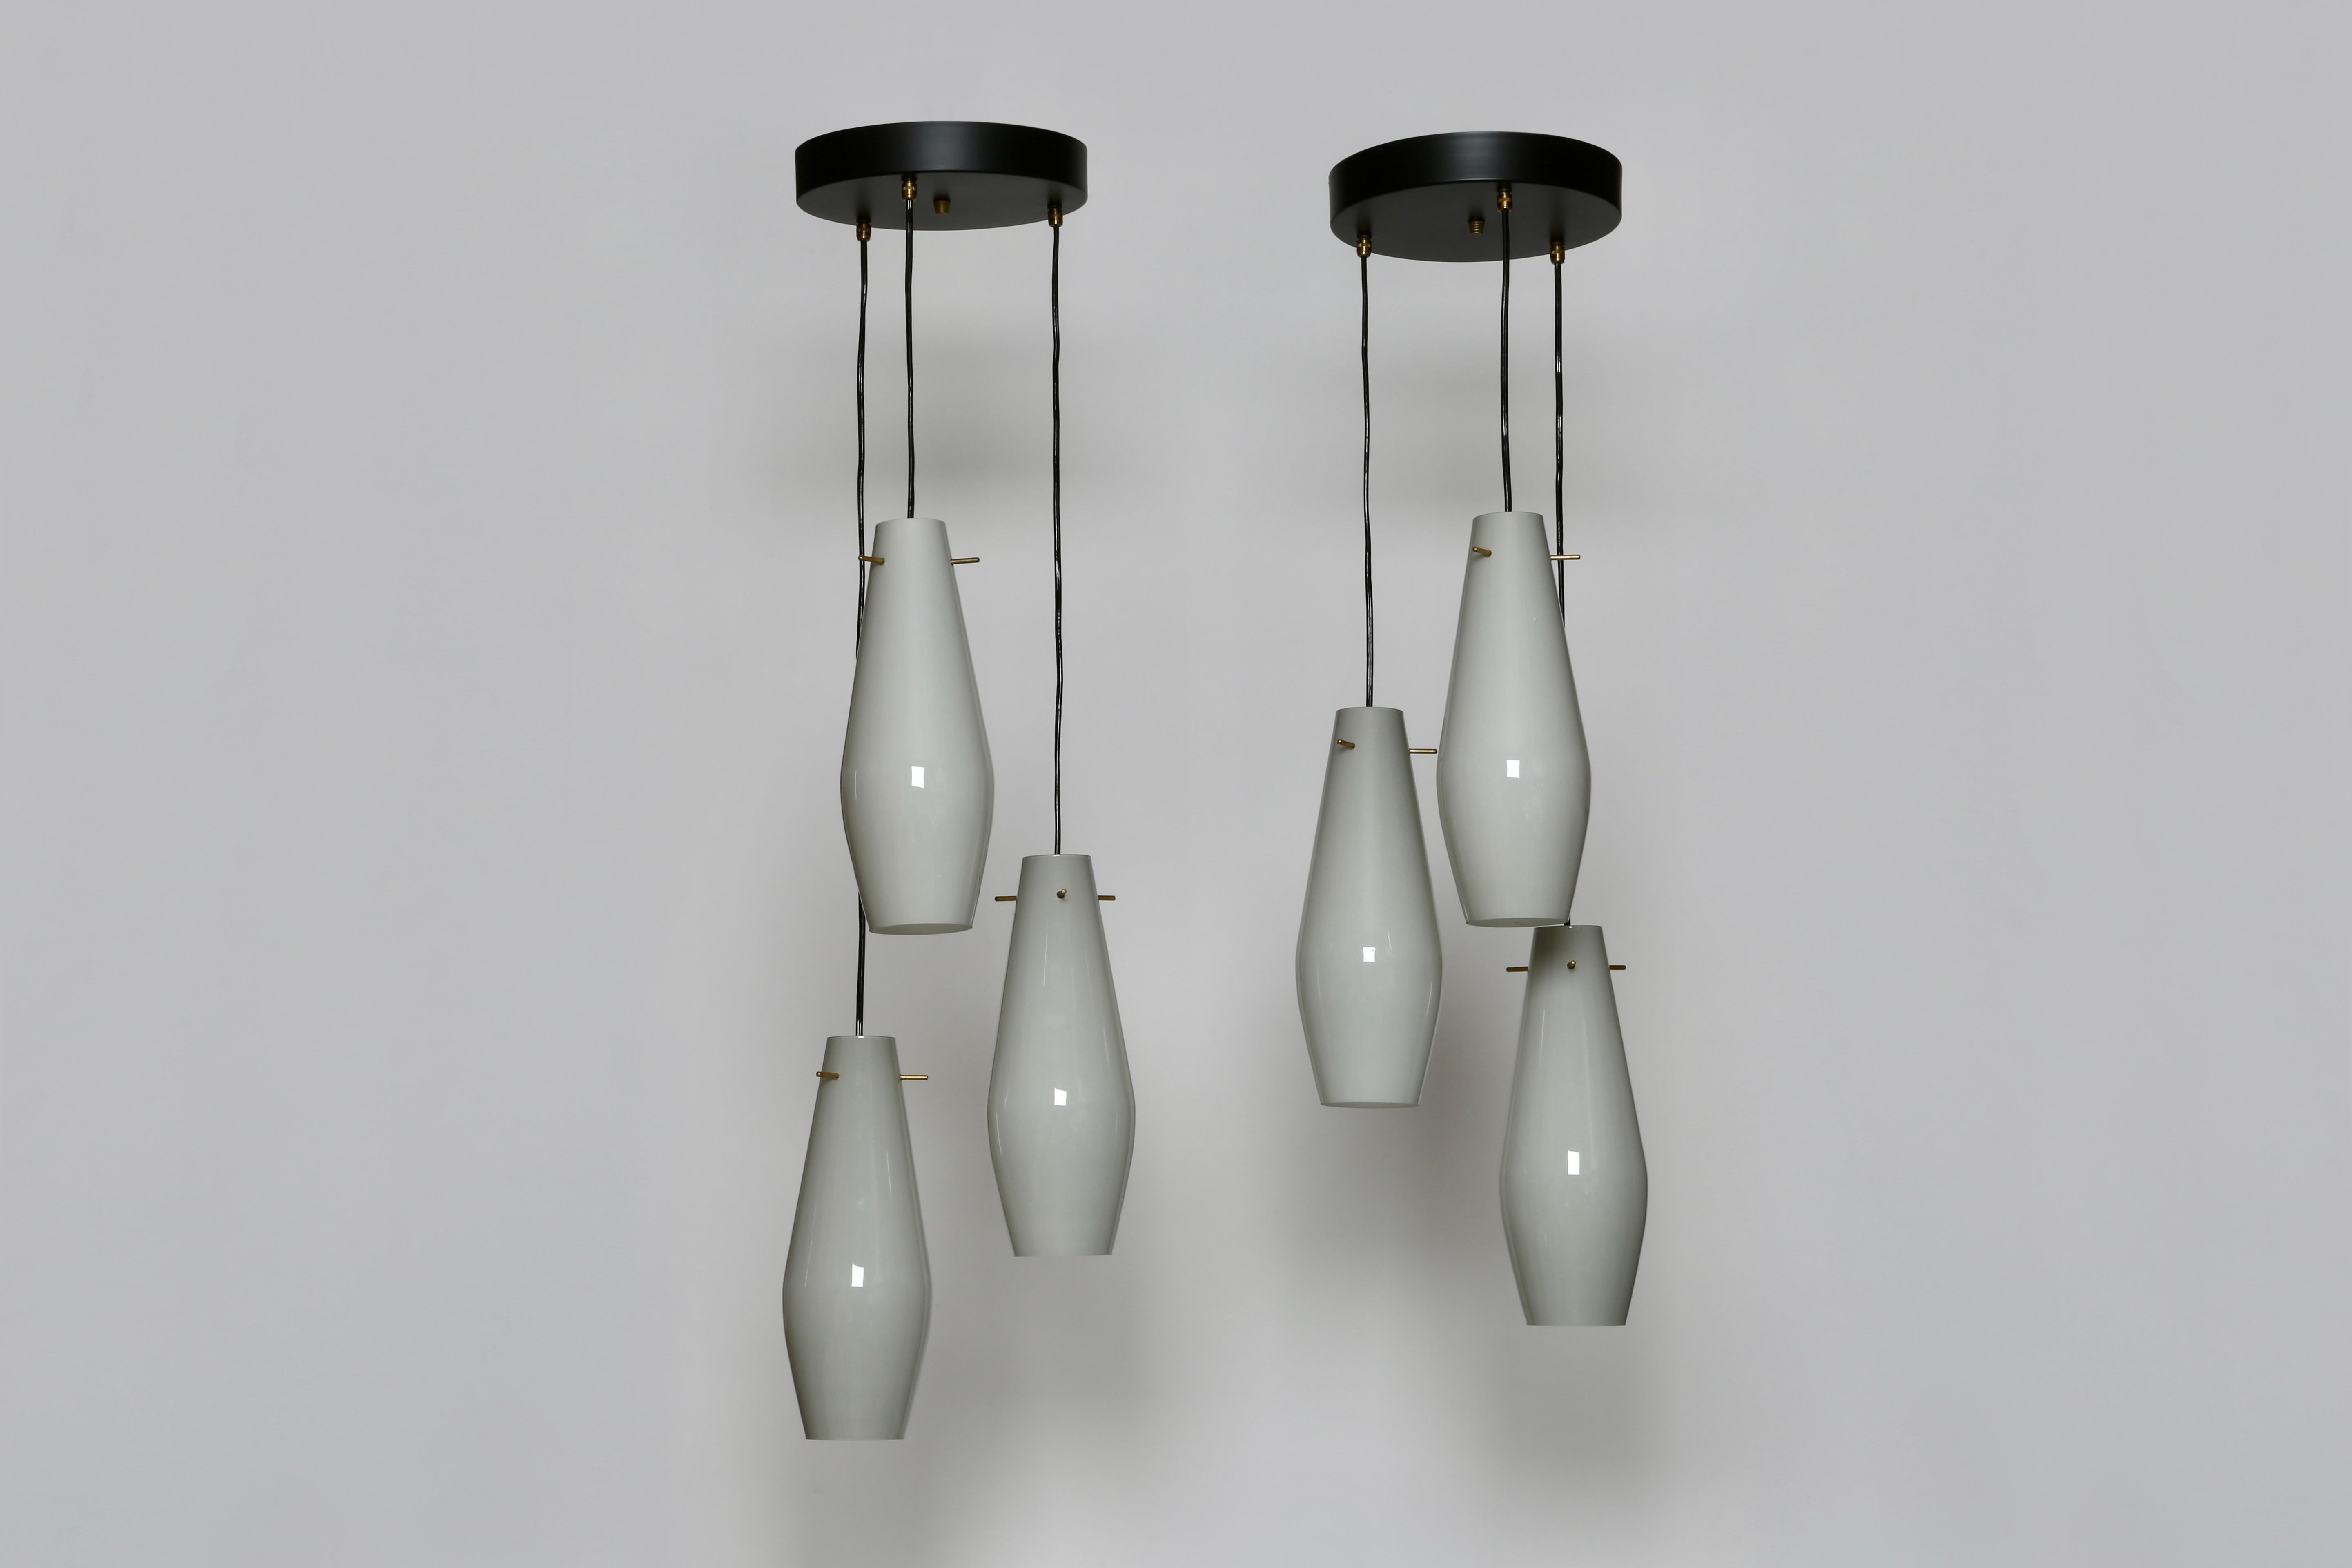 Murano glass ceiling suspensions by Vistosi.
Made in Italy 1960s
3 glass shades in double layered glass, gray on the outside, white inside.
Glass is 12 inches in height, 4.5 inches in diameter.
Overall drop is adjustable.
Each suspension takes 3